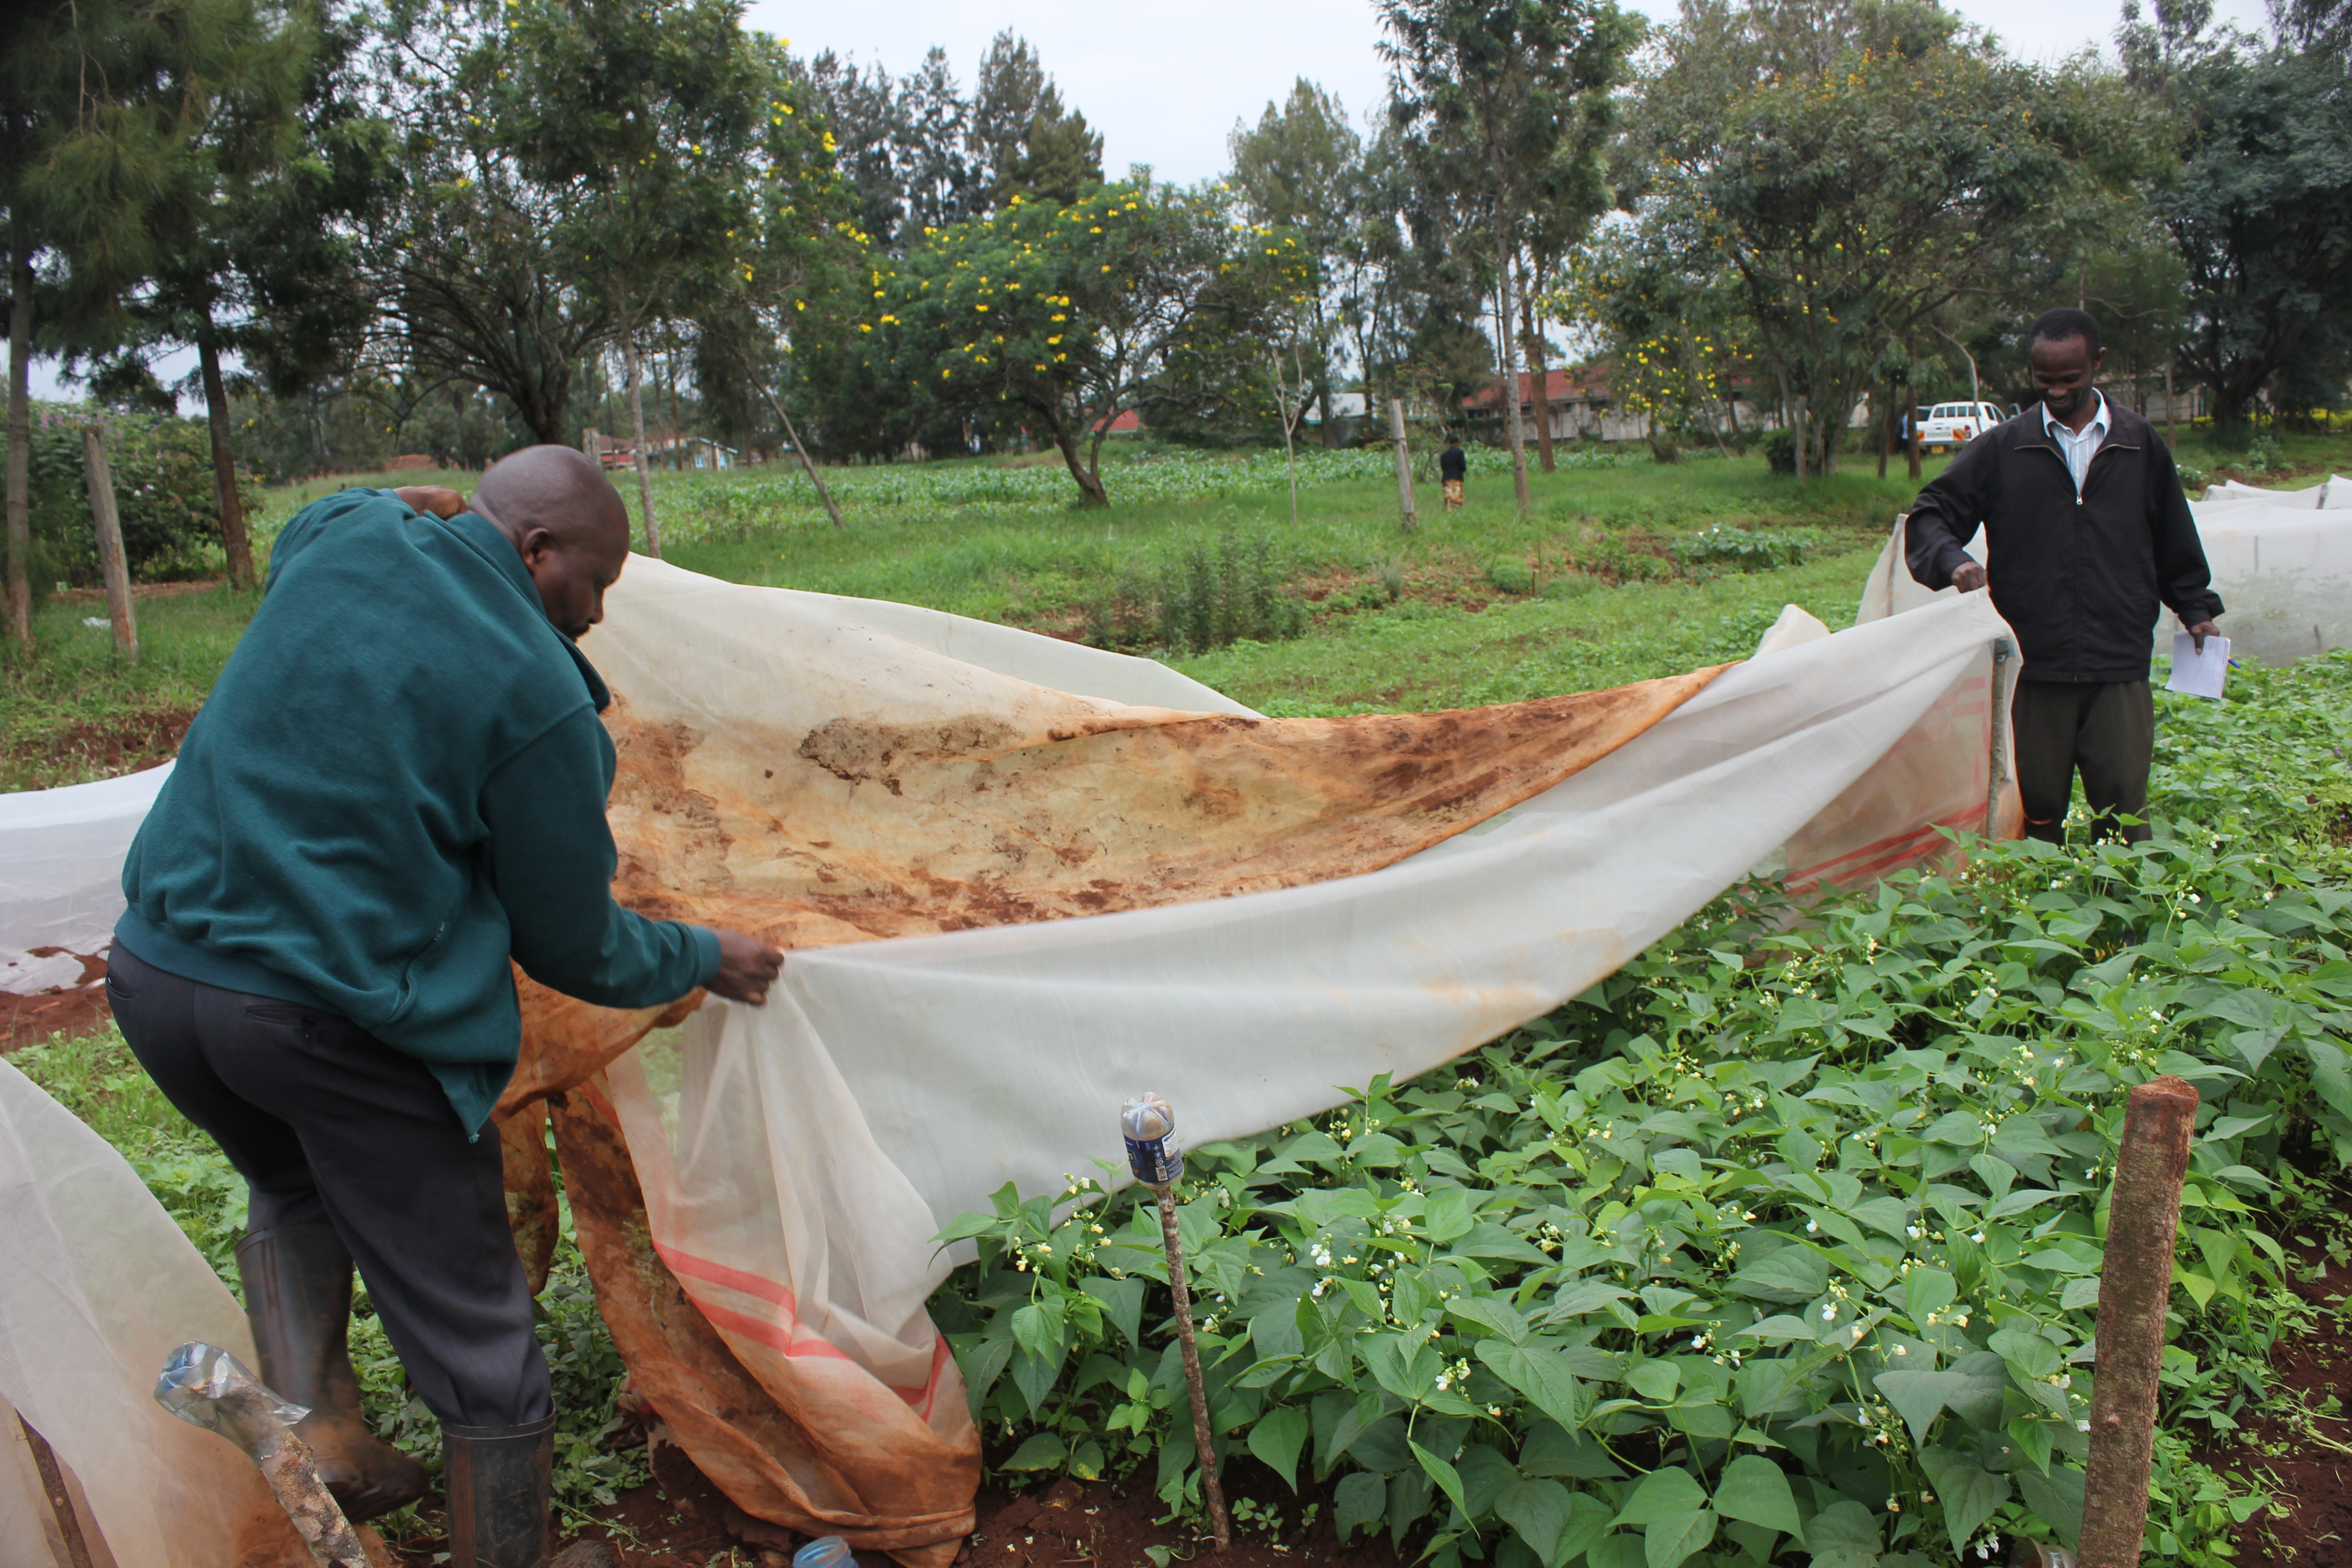 Agricultural researchers pull back nets from row of vegetable plants in Kenya.